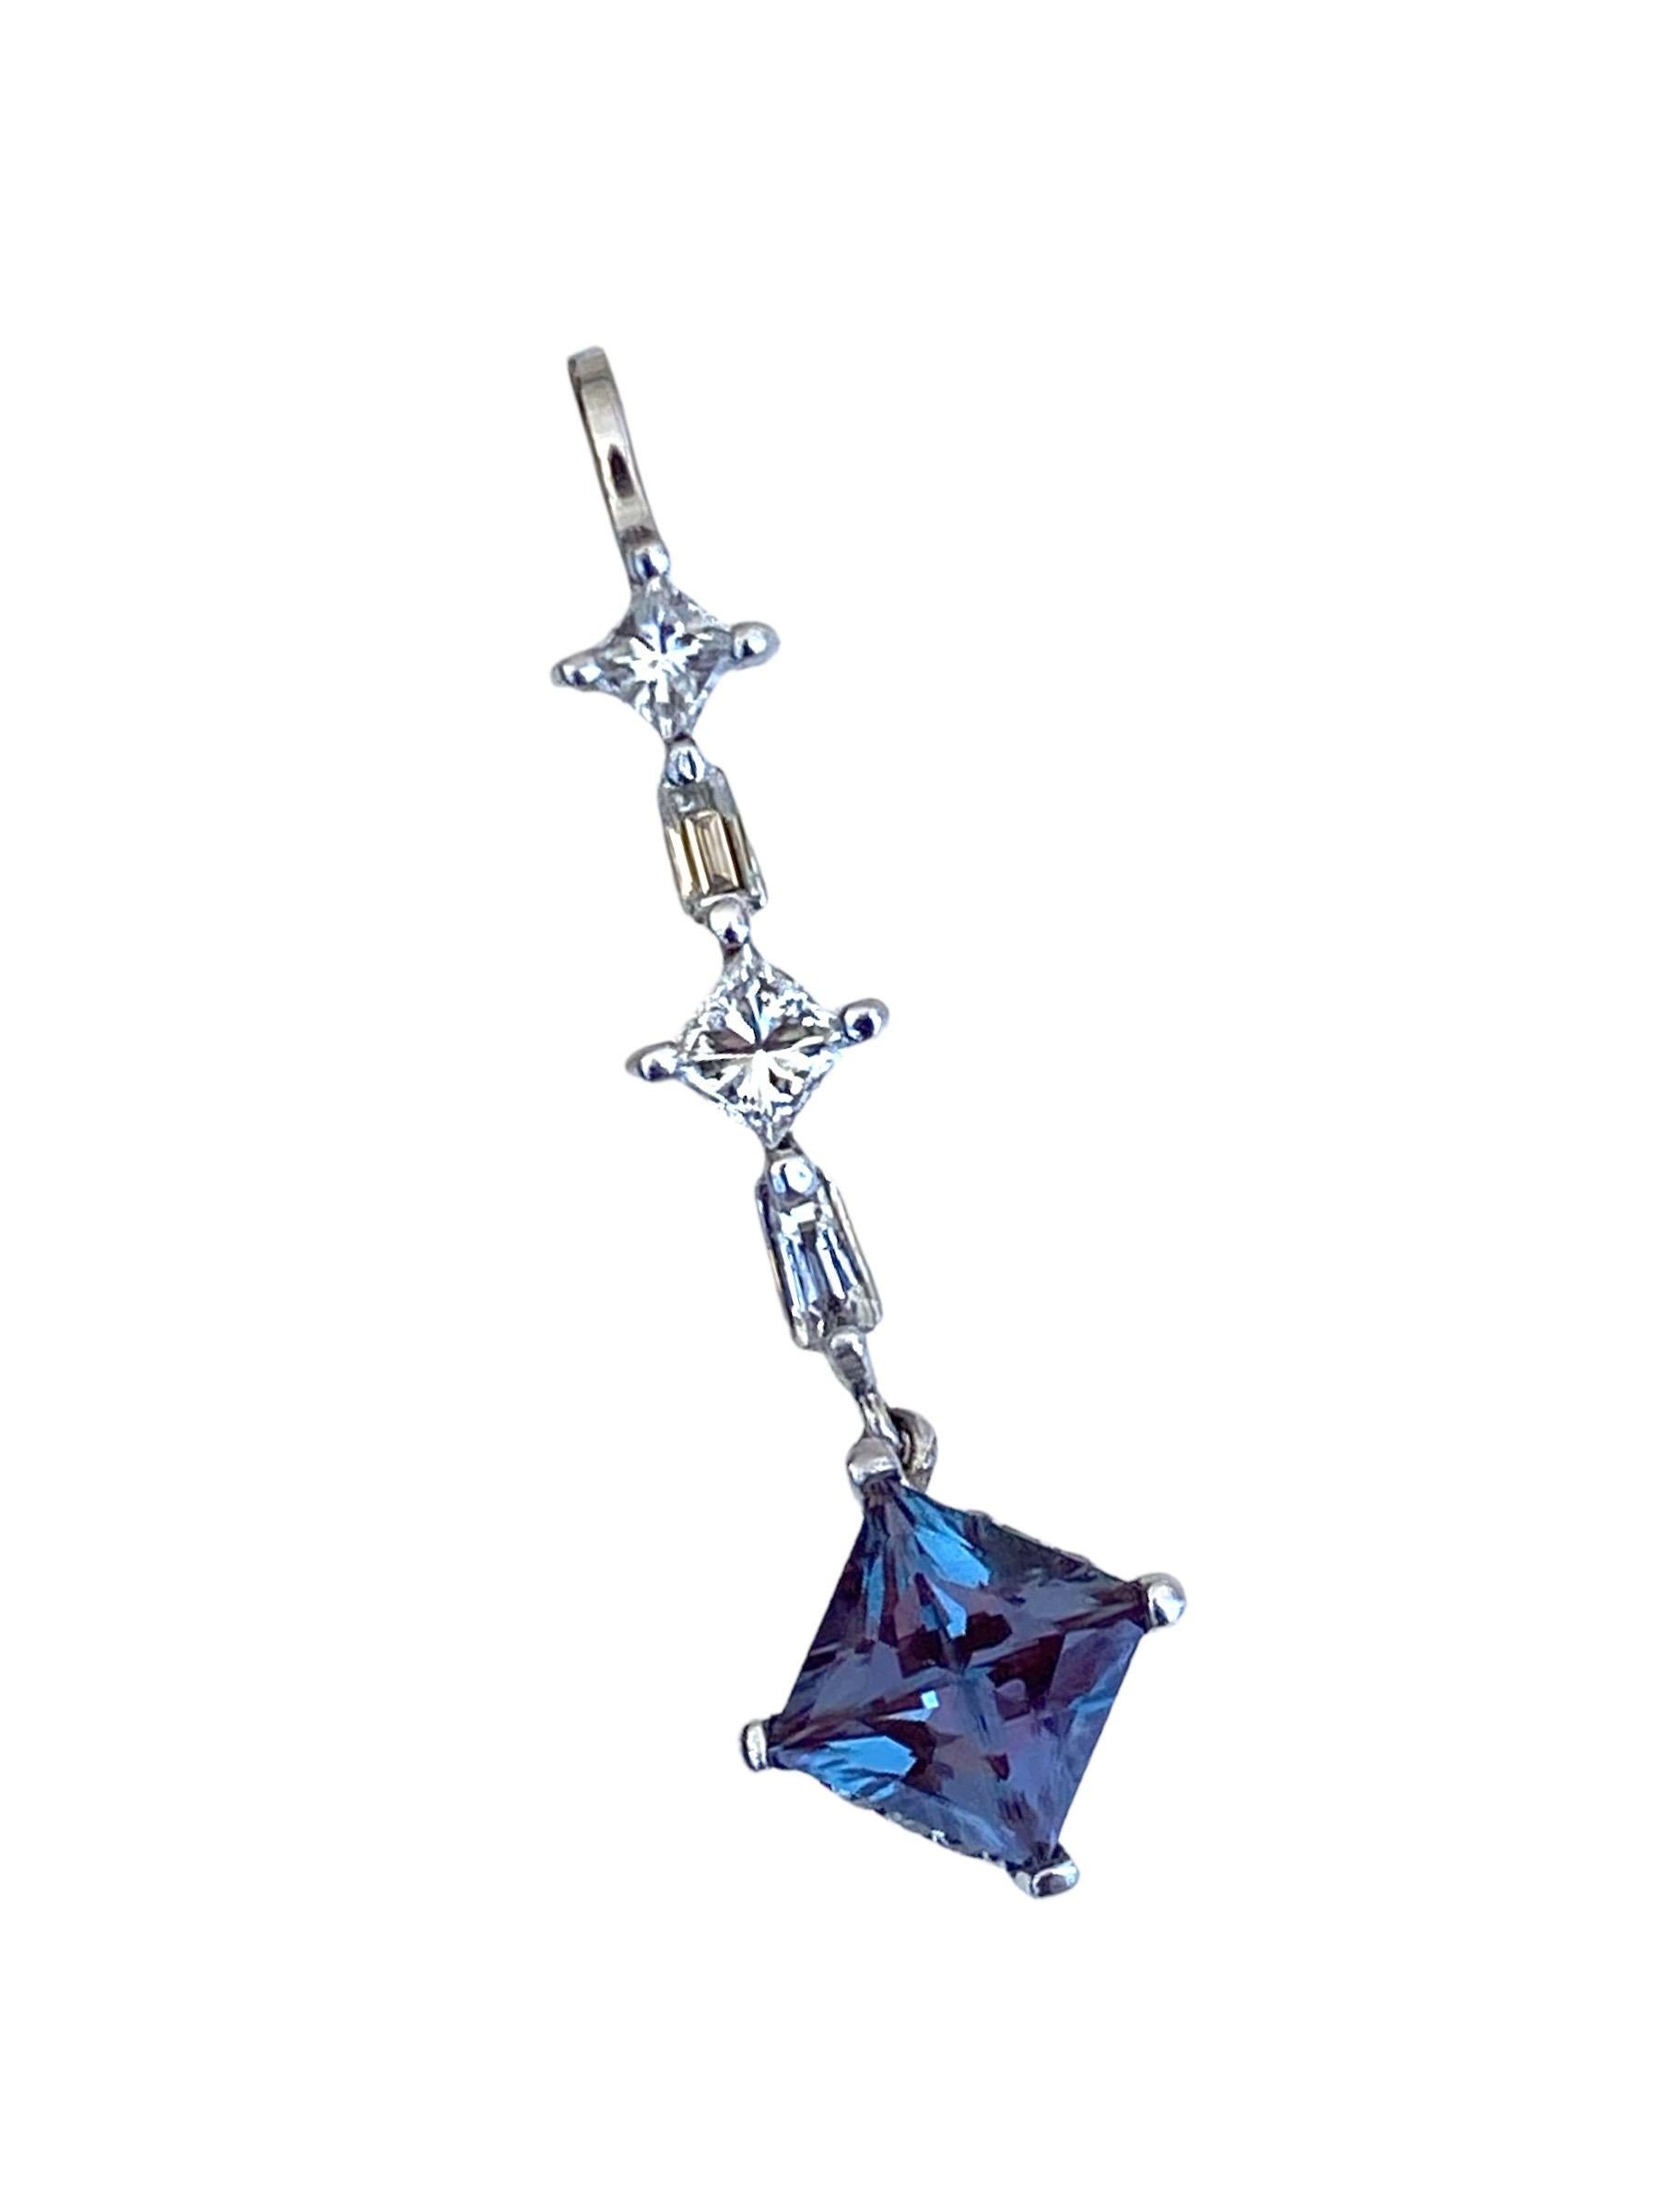 Princess cut mystic topaz measures 6.50 mm in diameter and weighs approximately 1.50 carat. The pendant is dazzled with diamond cuts of baguettes and round also on the underneath side of the setting.

Diamonds have a total weight of .60 carat. 